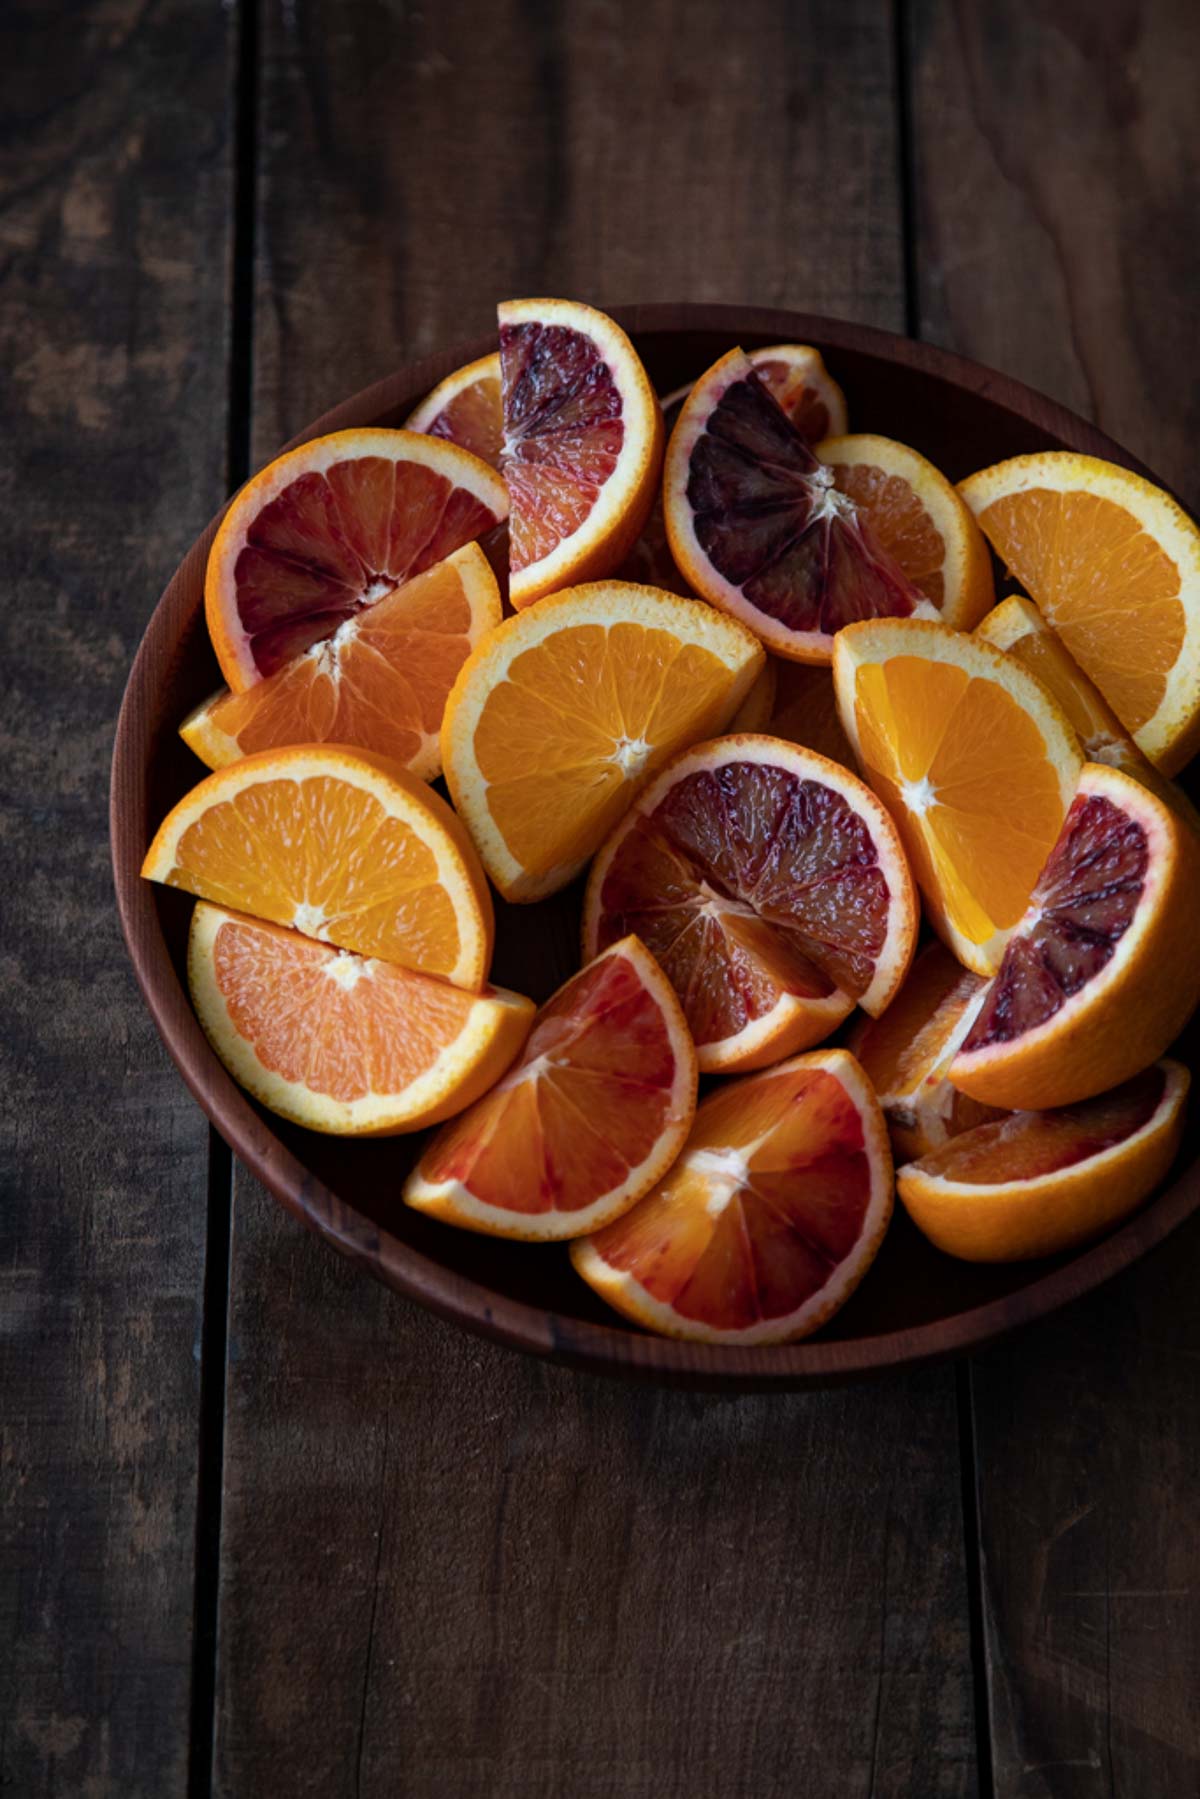 Cut up oranges in bowl - easy winter appetizers